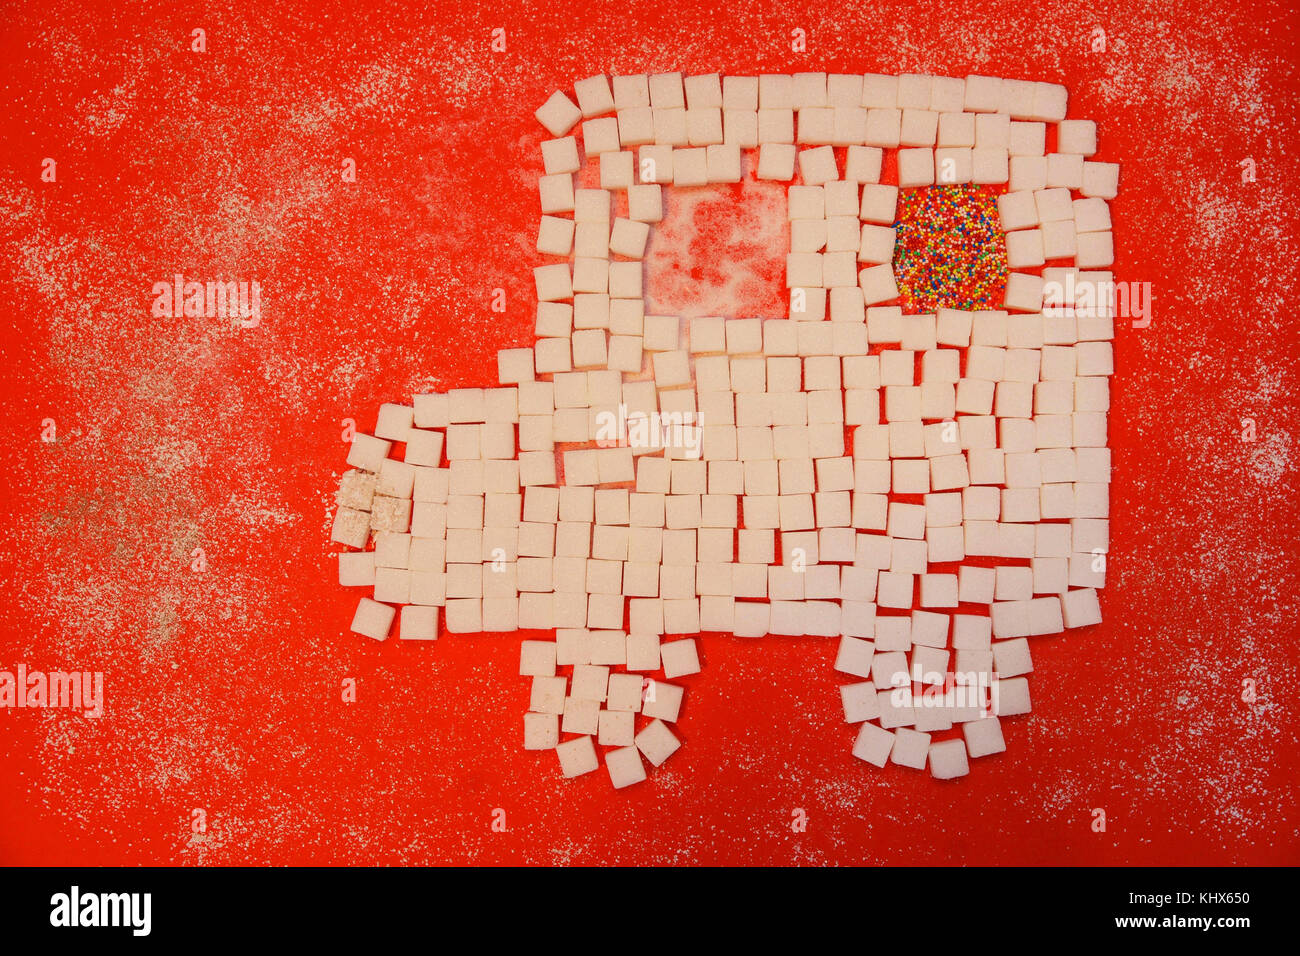 Symbolic picture for Diabetes disease, made of sugar cubes. Diabetes mellitus is characterized by recurrent or persistent high blood sugar. Stock Photo